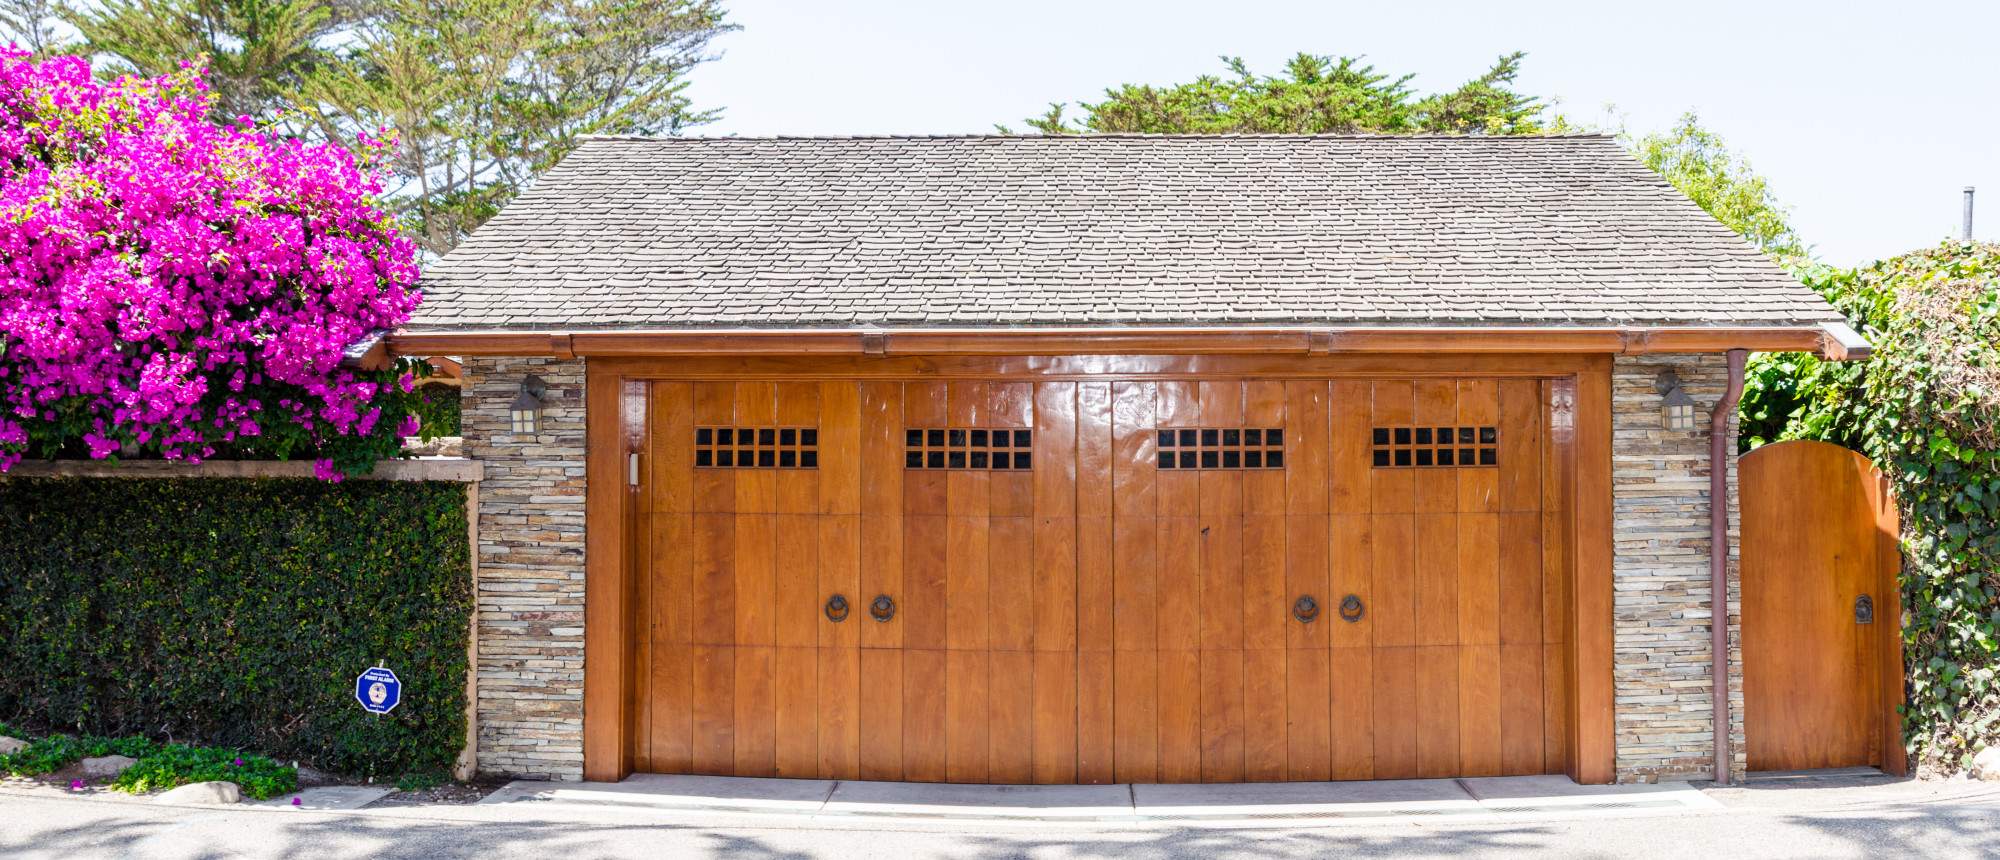 4 Garage Design Ideas for Homeowners